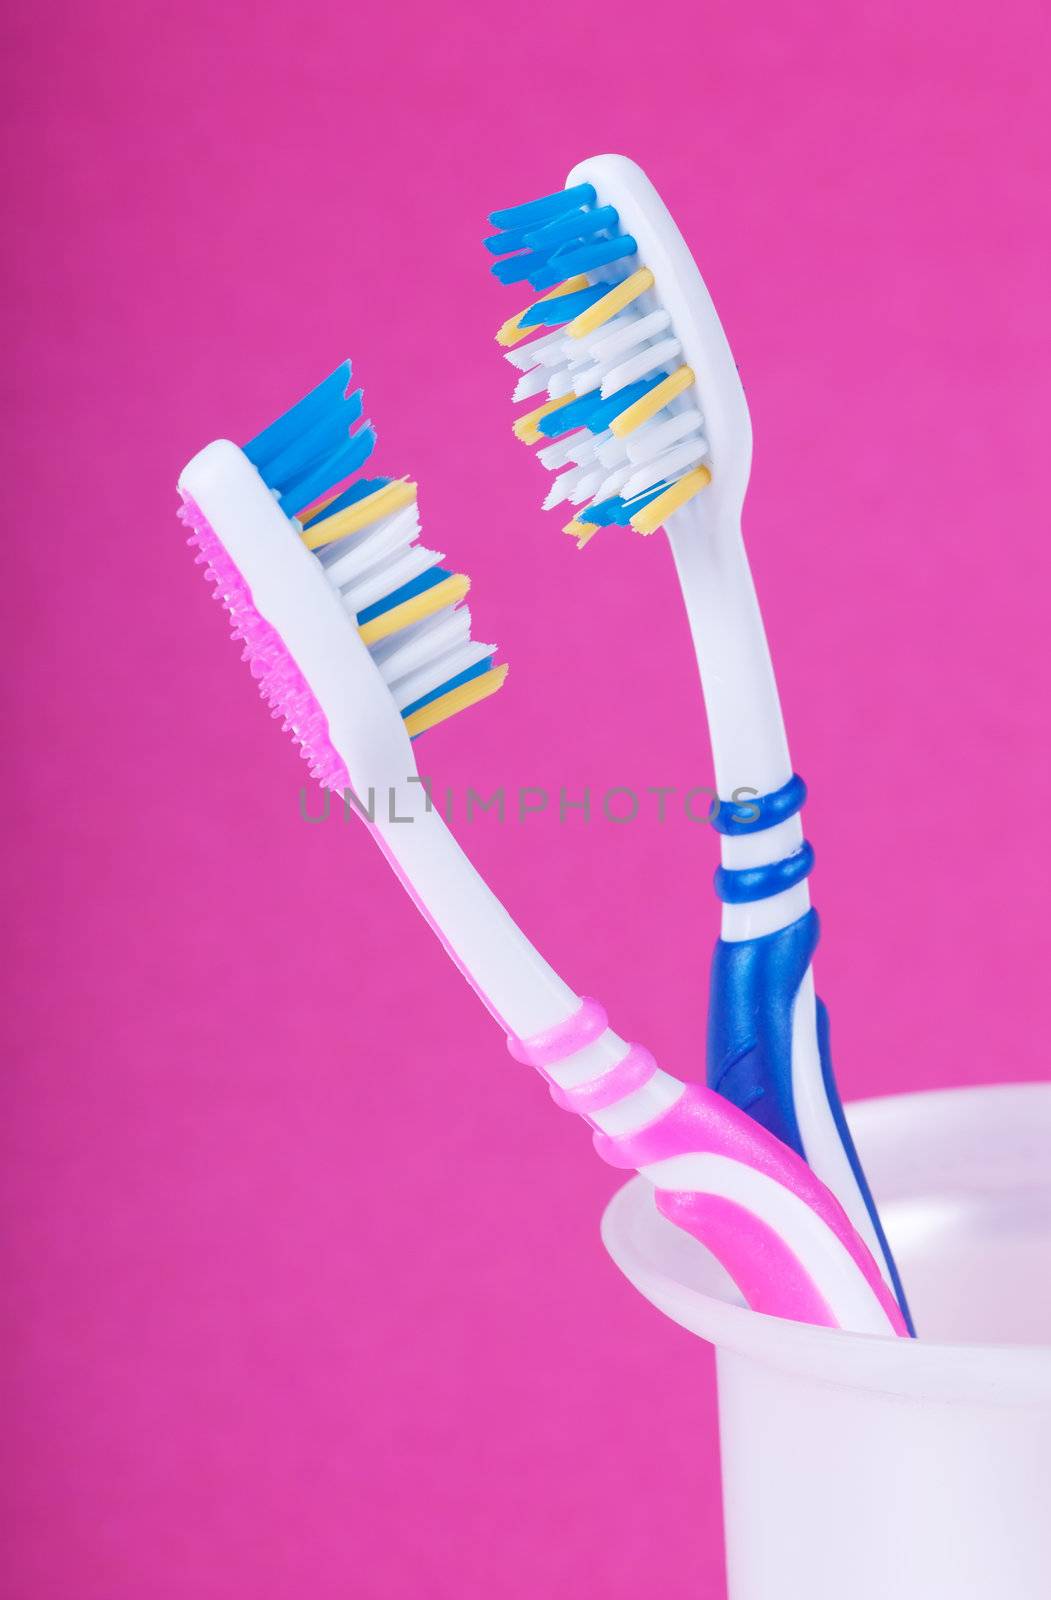 A couple of toothbrushes over pink background